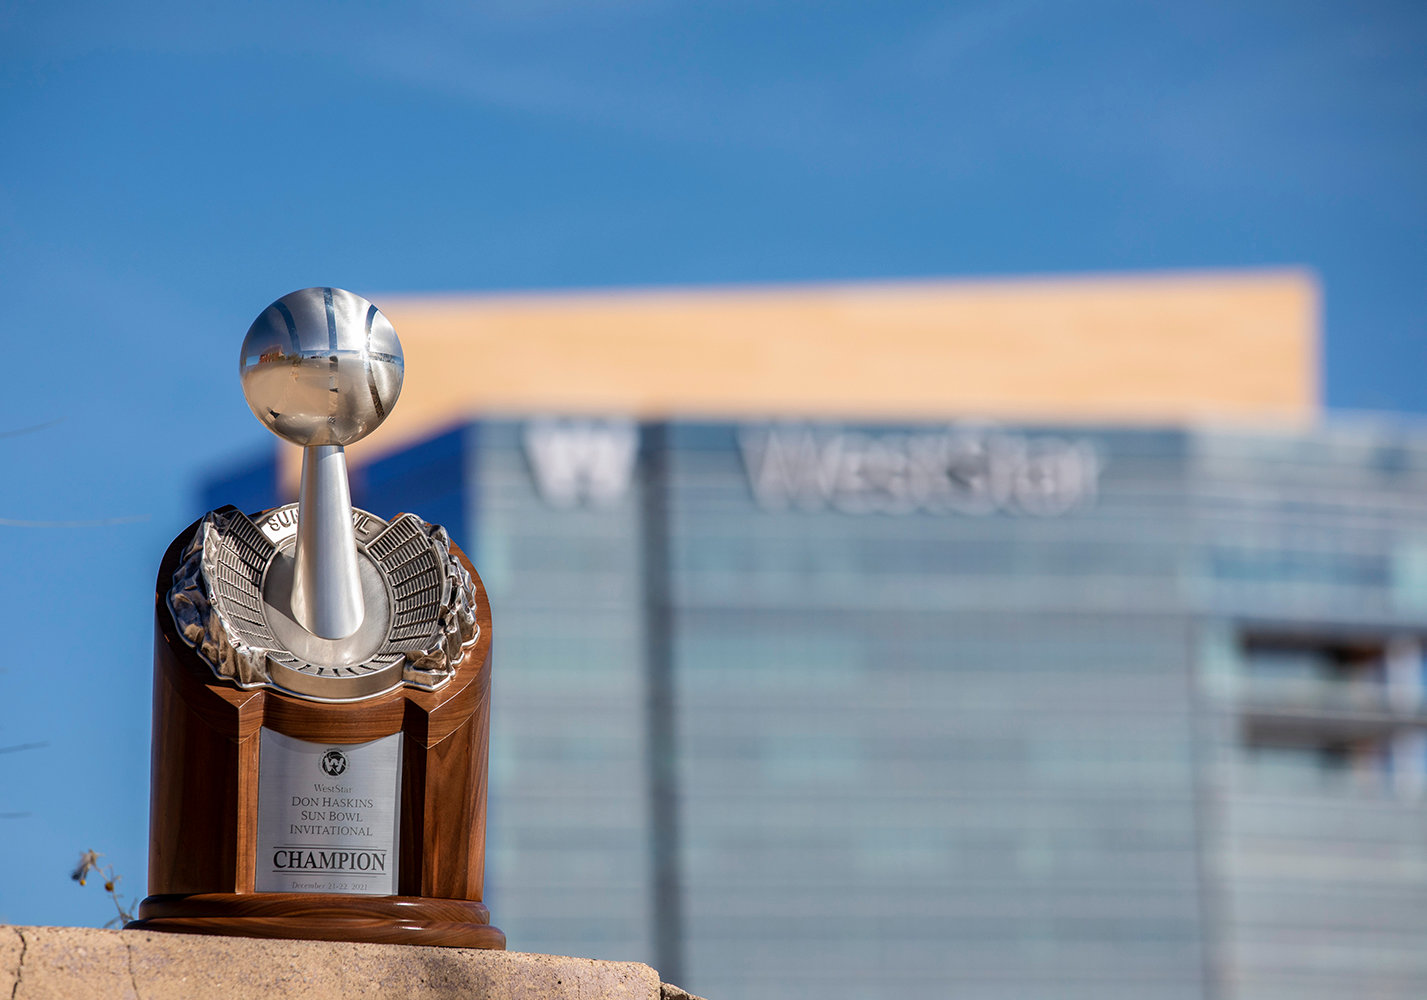 Trophy of the 60th Annual WestStar Don Haskins Basketball Invitational, December 22, 2021, in El Paso, TX. Photo by Ivan Pierre Aguirre/Sun Bowl Association